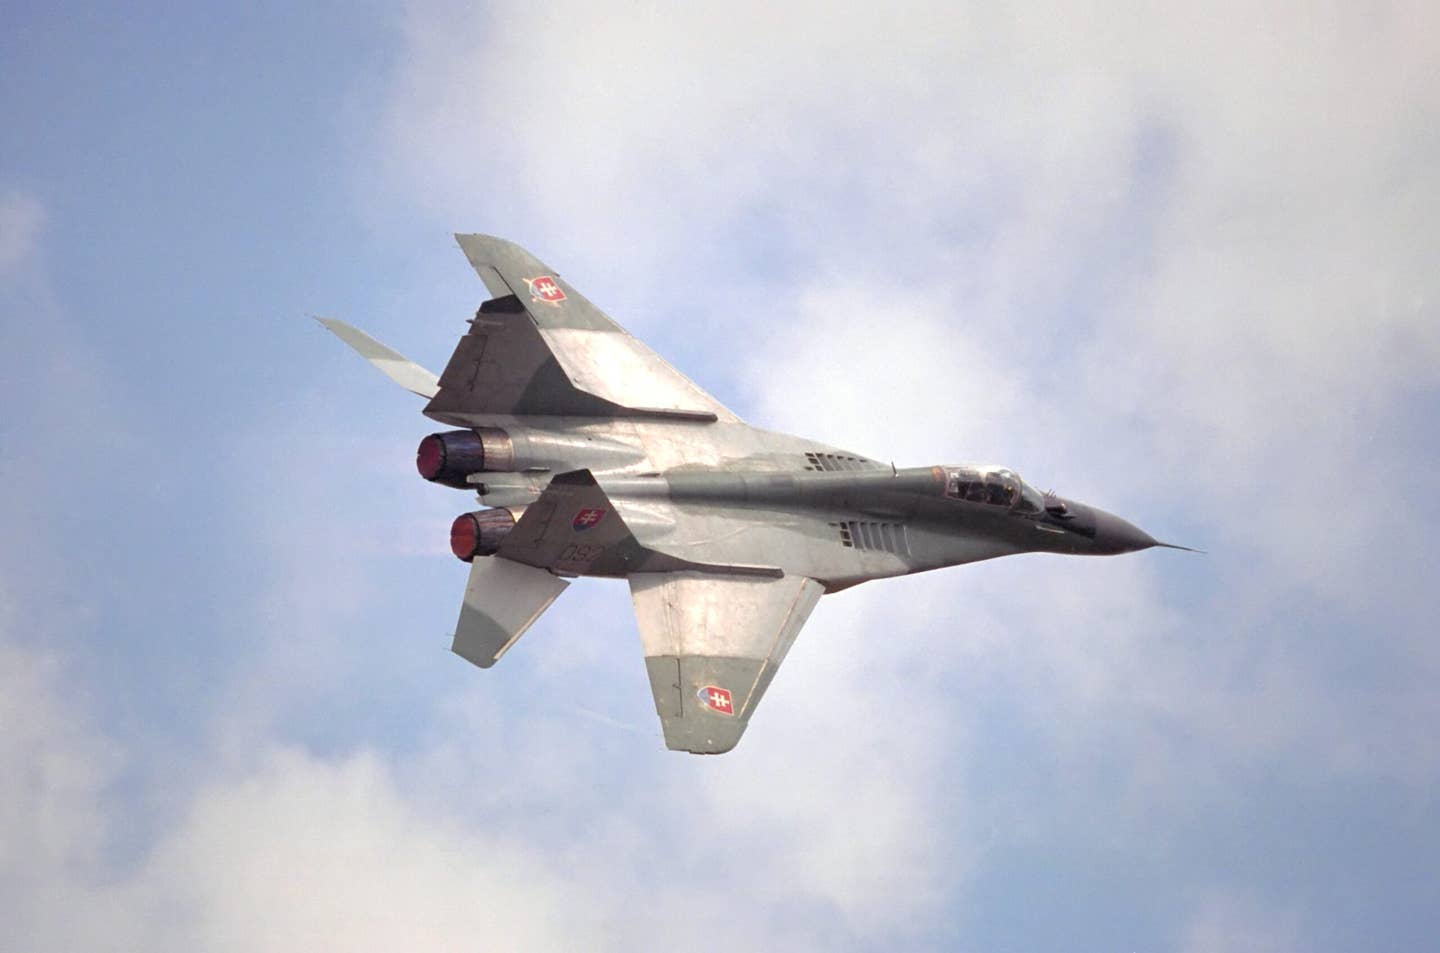 An aerial demonstration of a Slovakian Air Force's MiG-29A Fulcrum. <em>Credit: Brad Fallin/Wikimedia Commons</em>